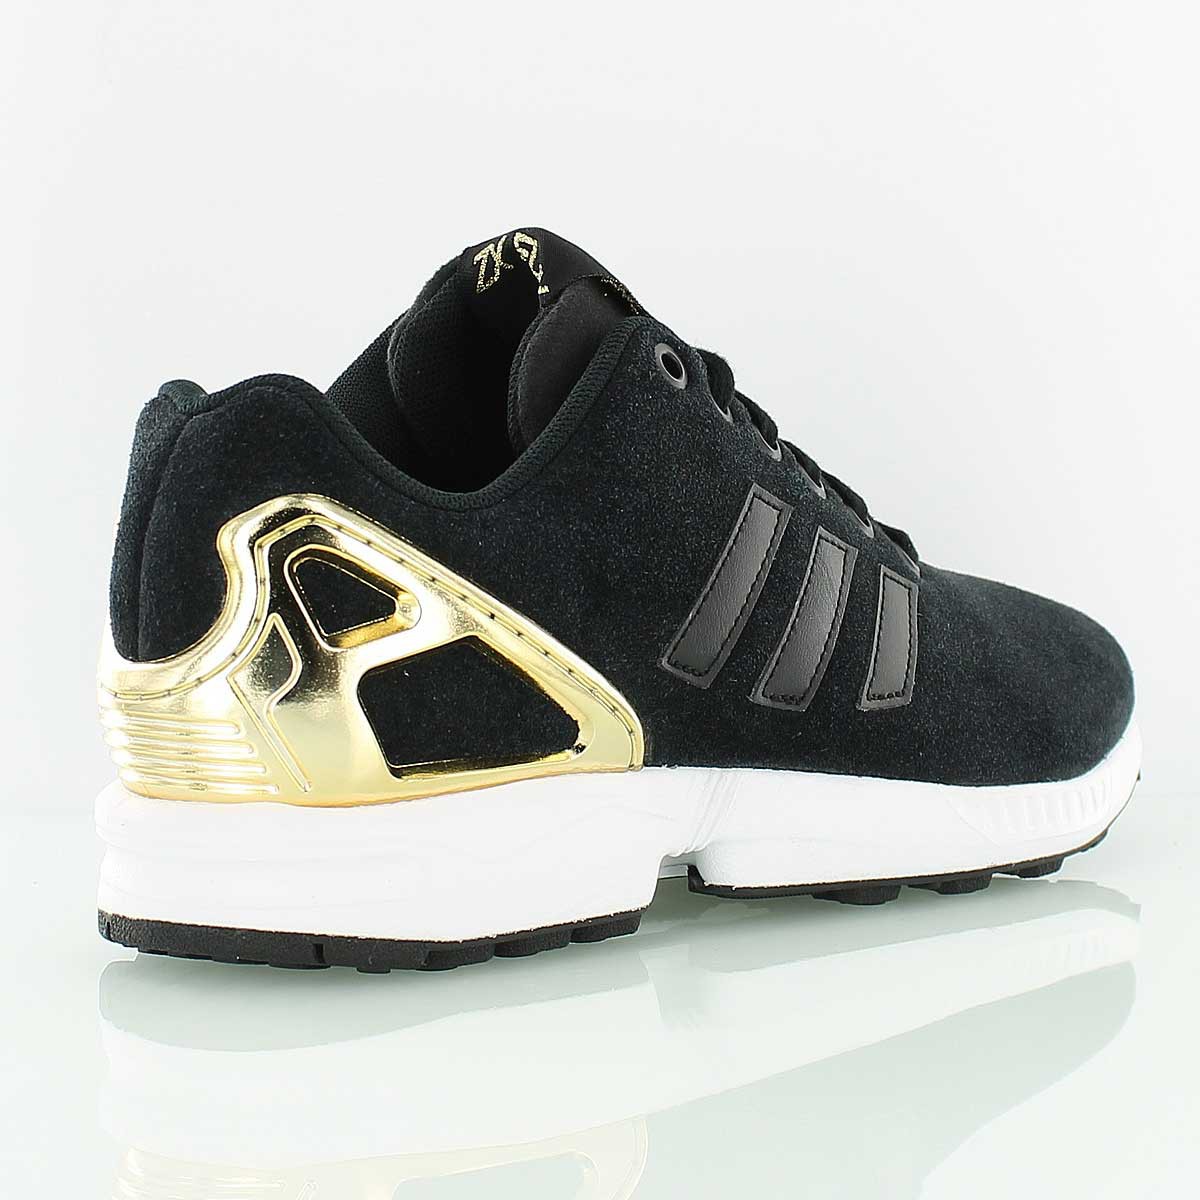 adidas zx flux or